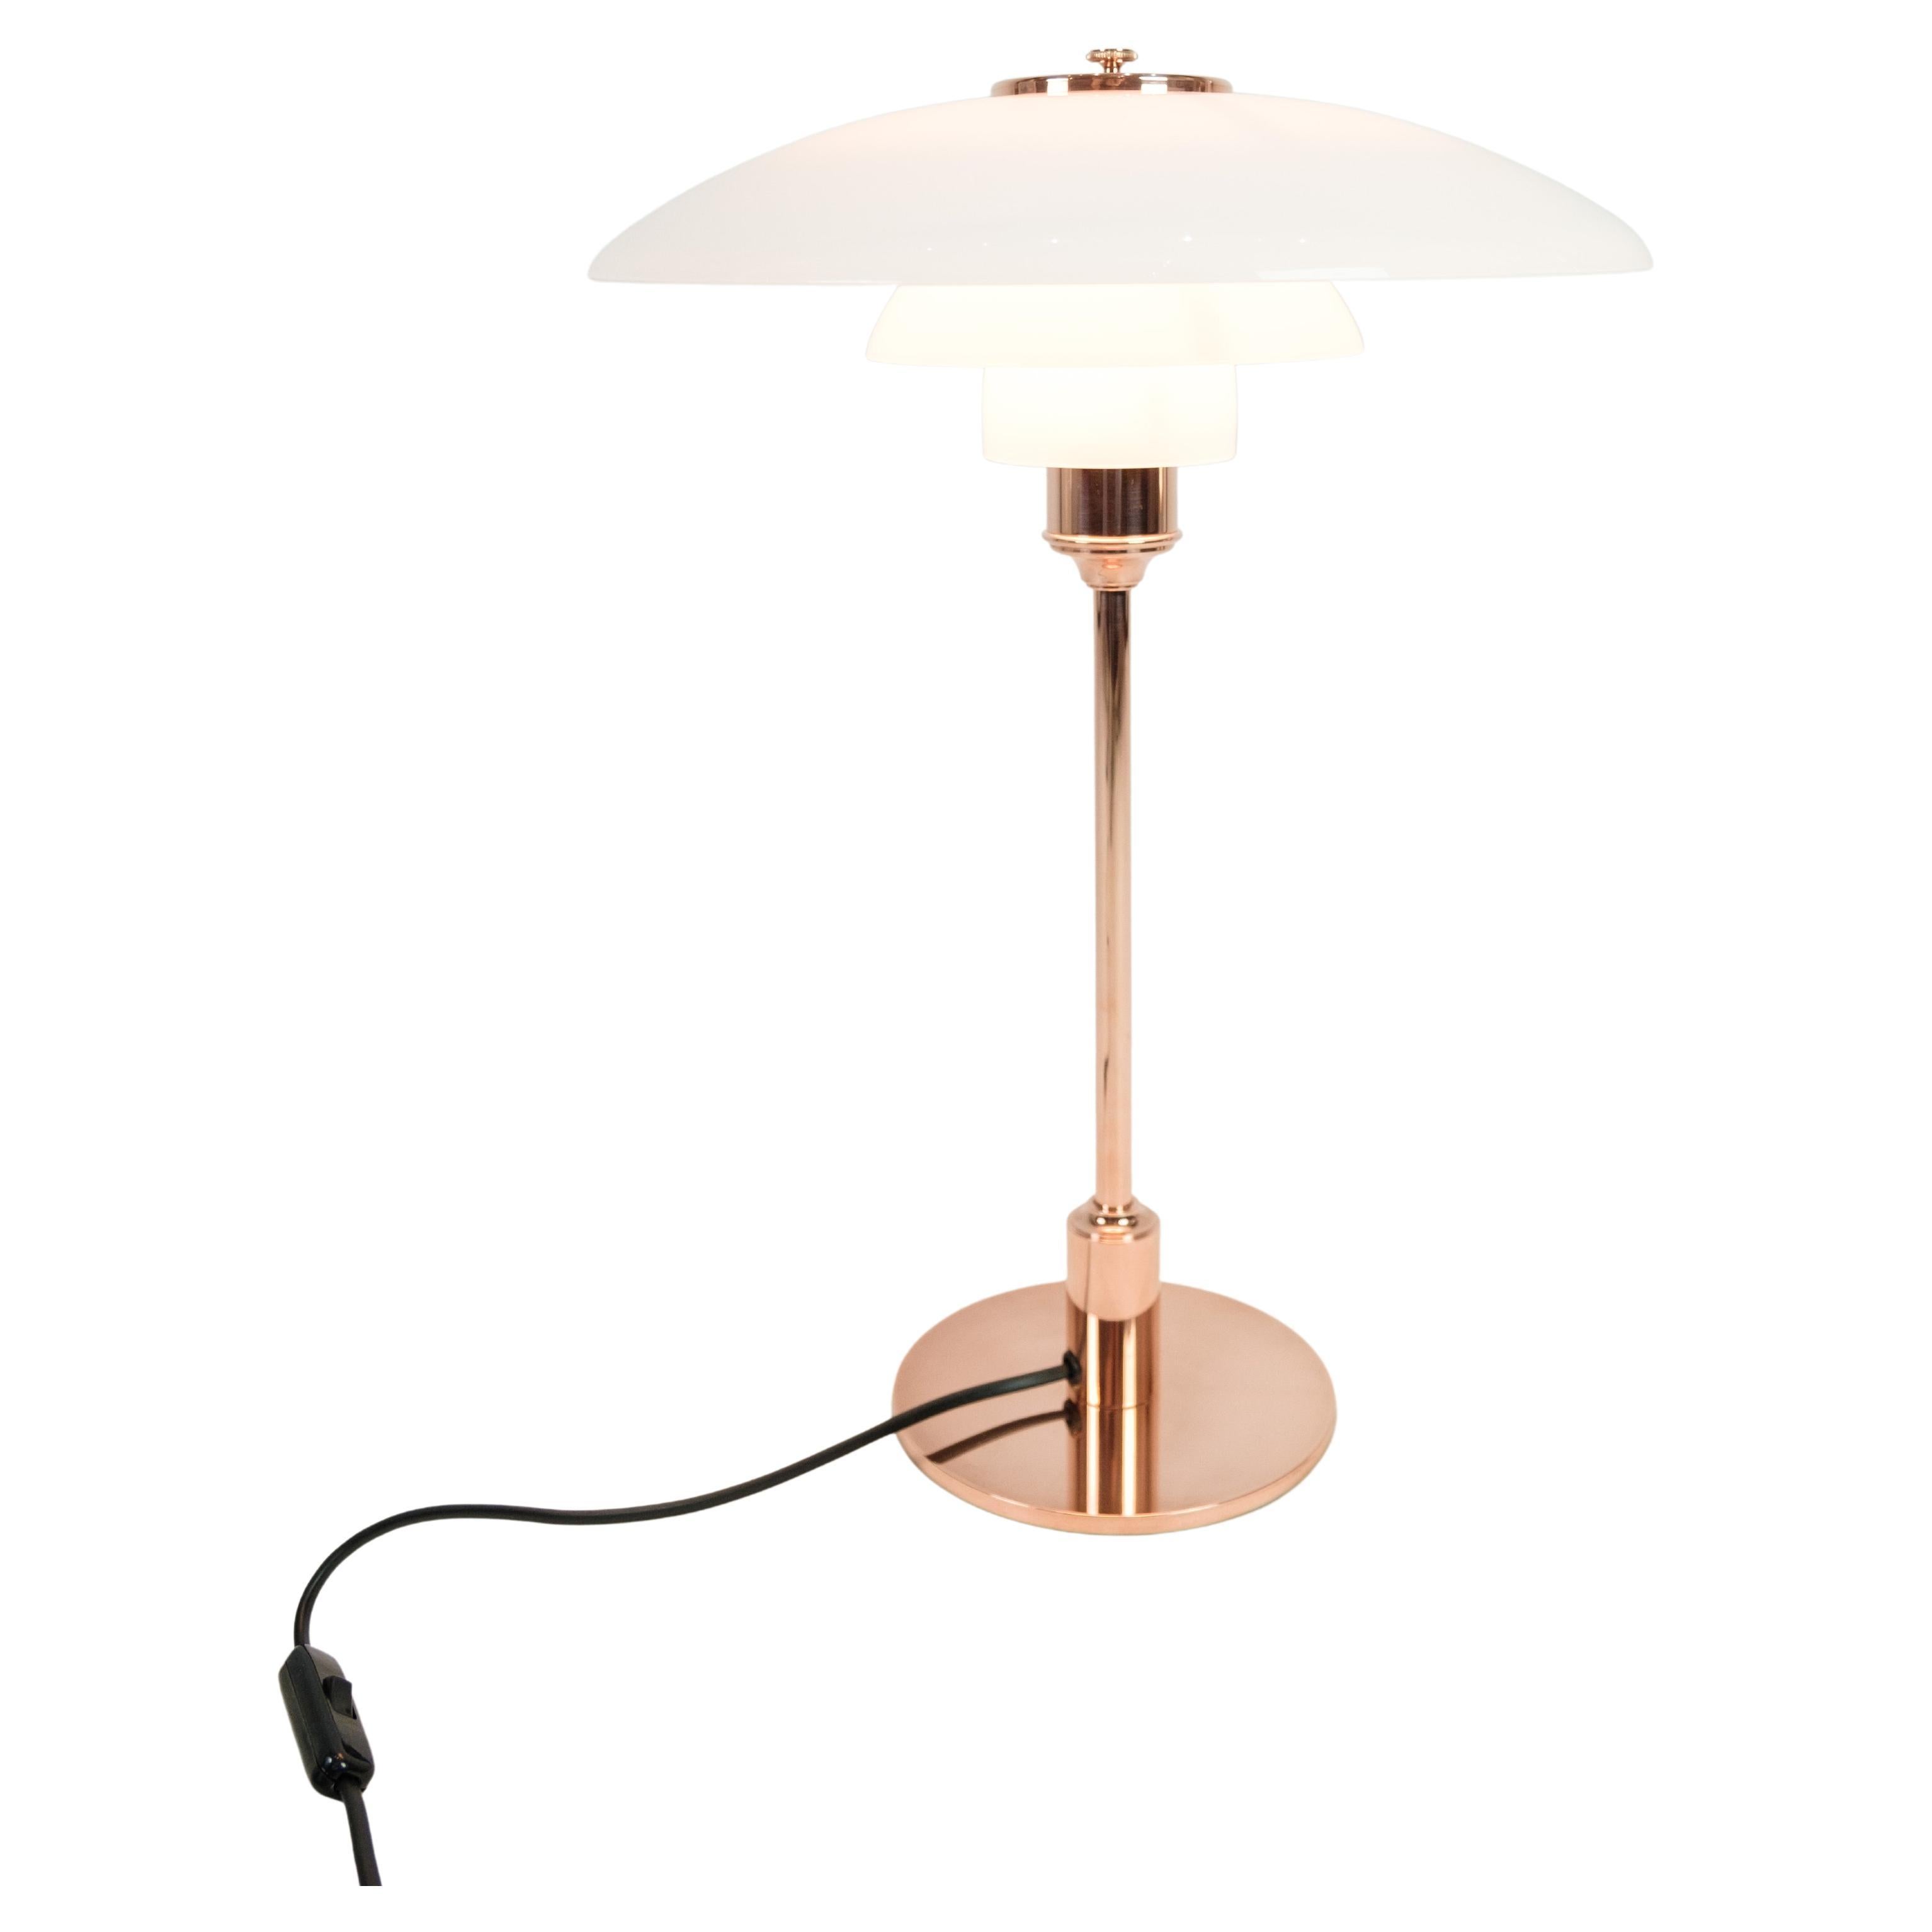 PH Table Lamp Model Ph3½-2½ Limited Edition By Poul Henningsen From 1927 For Sale